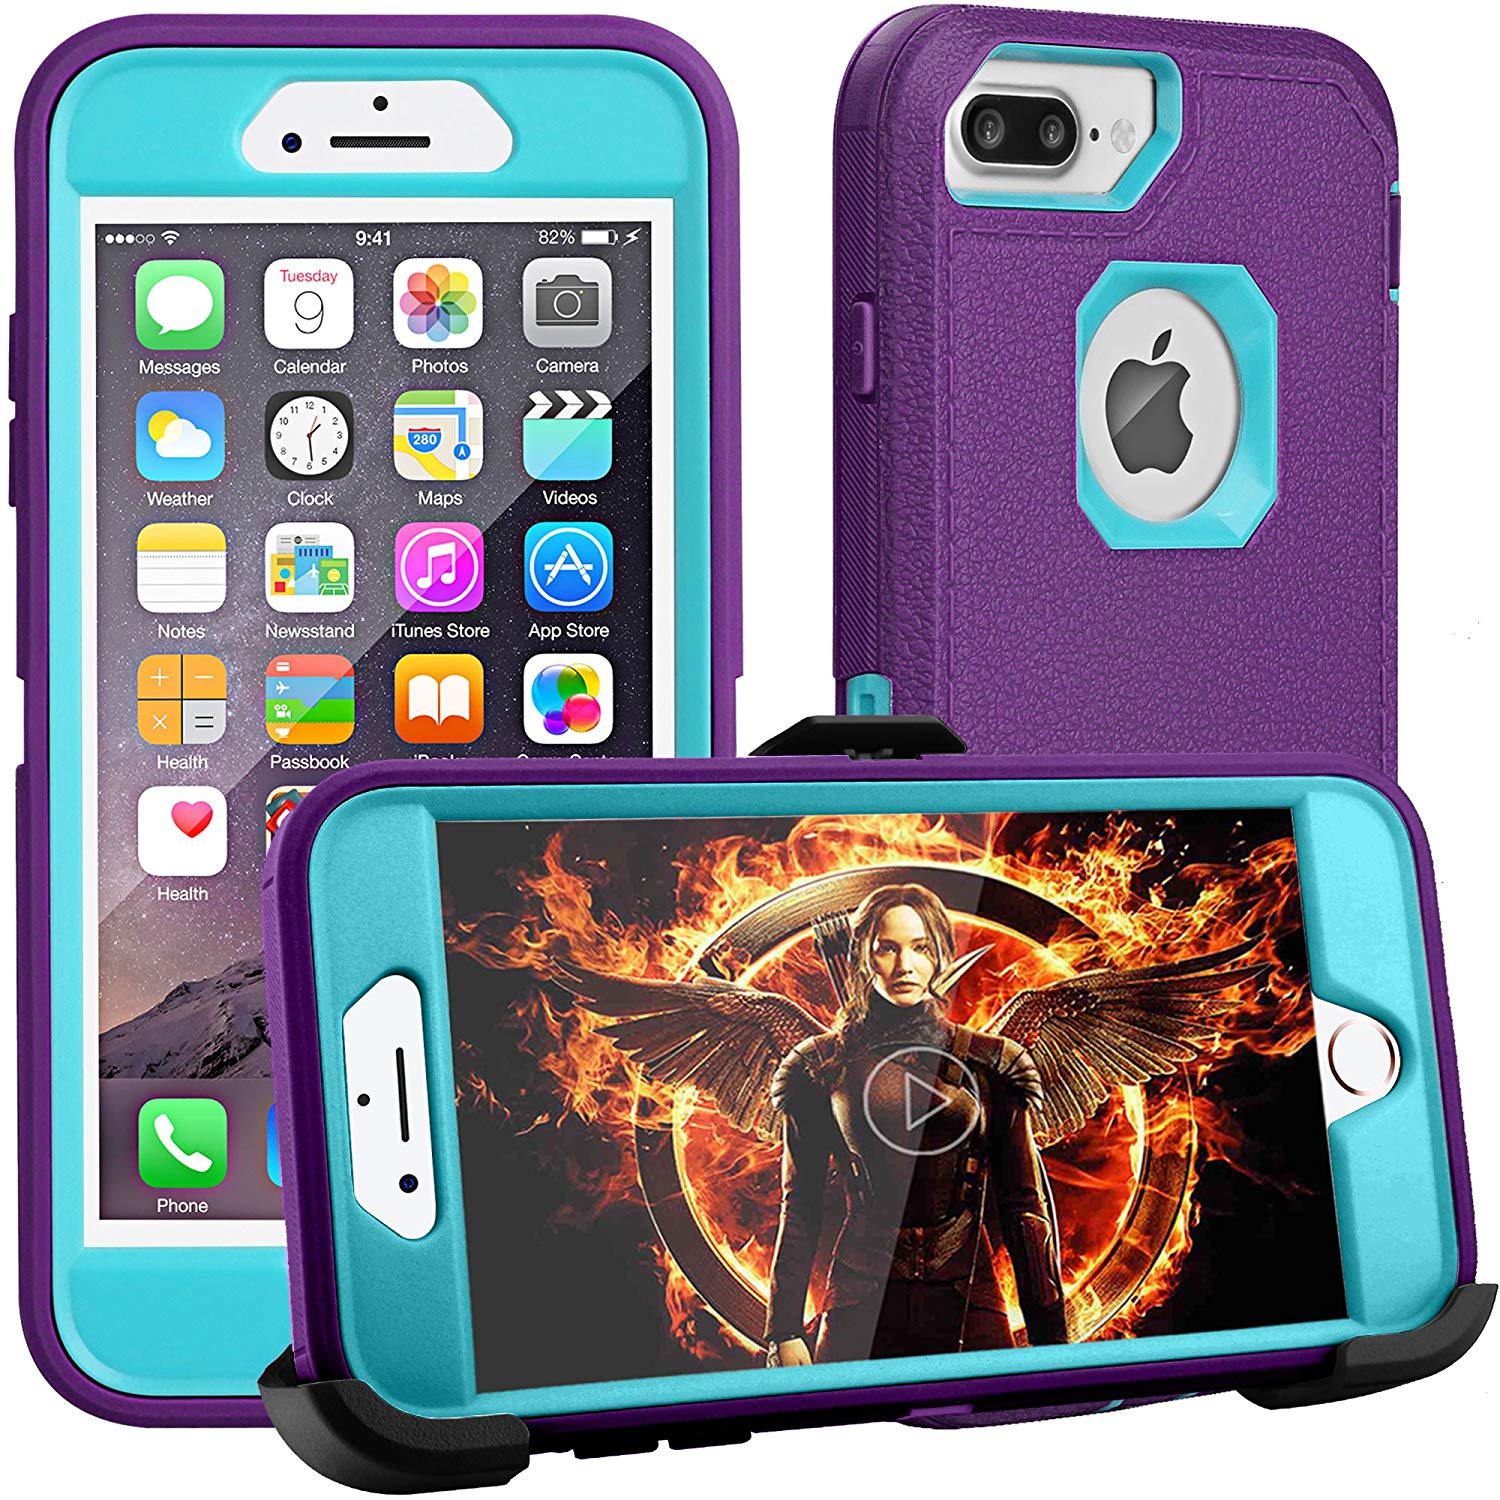 iPhone 8 Plus Case,iPhone 7 Plus Case,iPhone 6 Plus Case,FOGEEK[Dust-Proof]Belt-Clip Heavy Duty Kickstand Cover[Shockproof] PC+TPU for Apple iPhone 7 Plus,iPhone 6/6s Plus(Purple and Blue) …